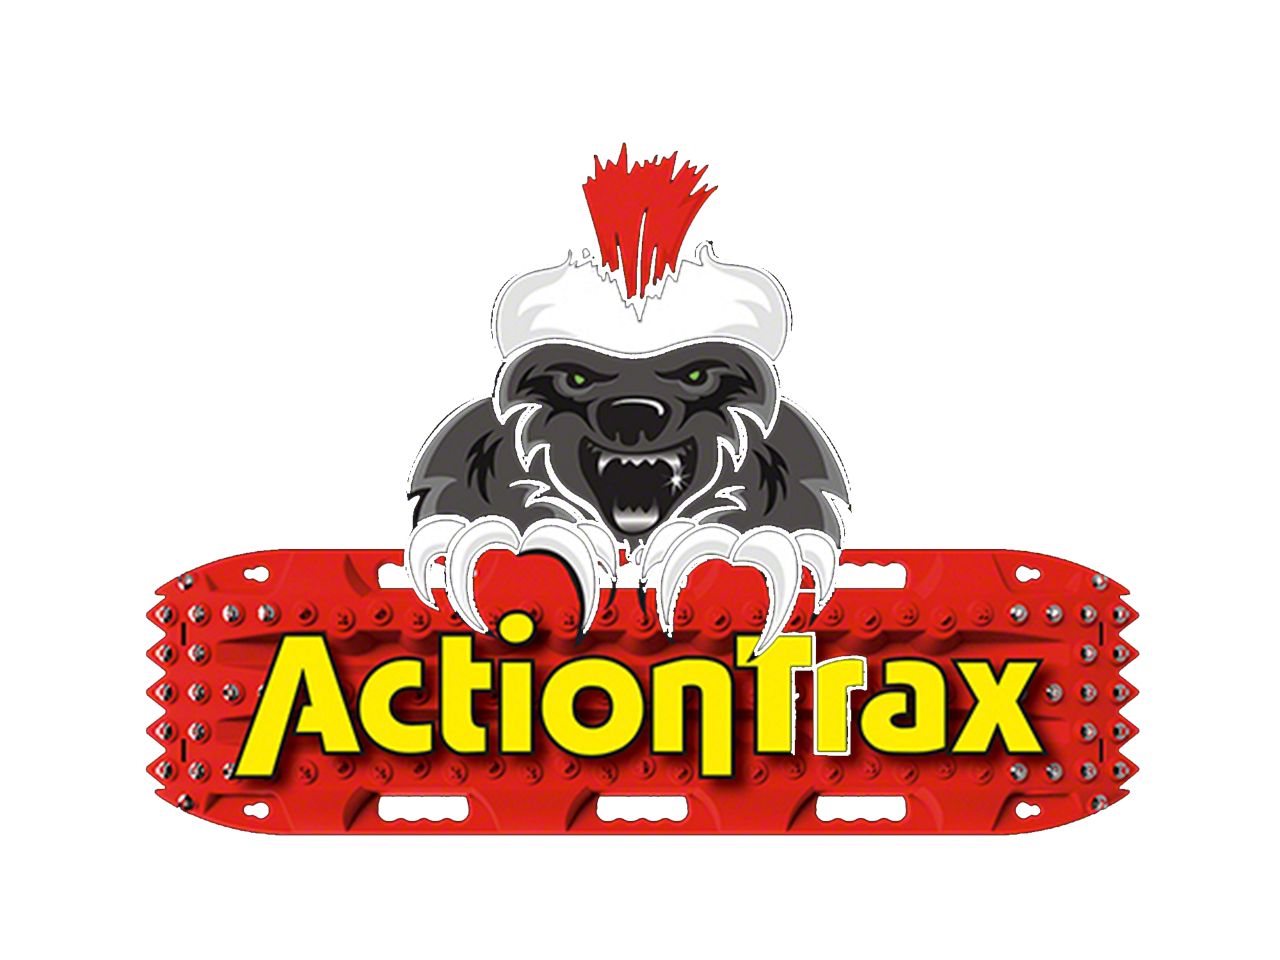 ActionTrax Parts